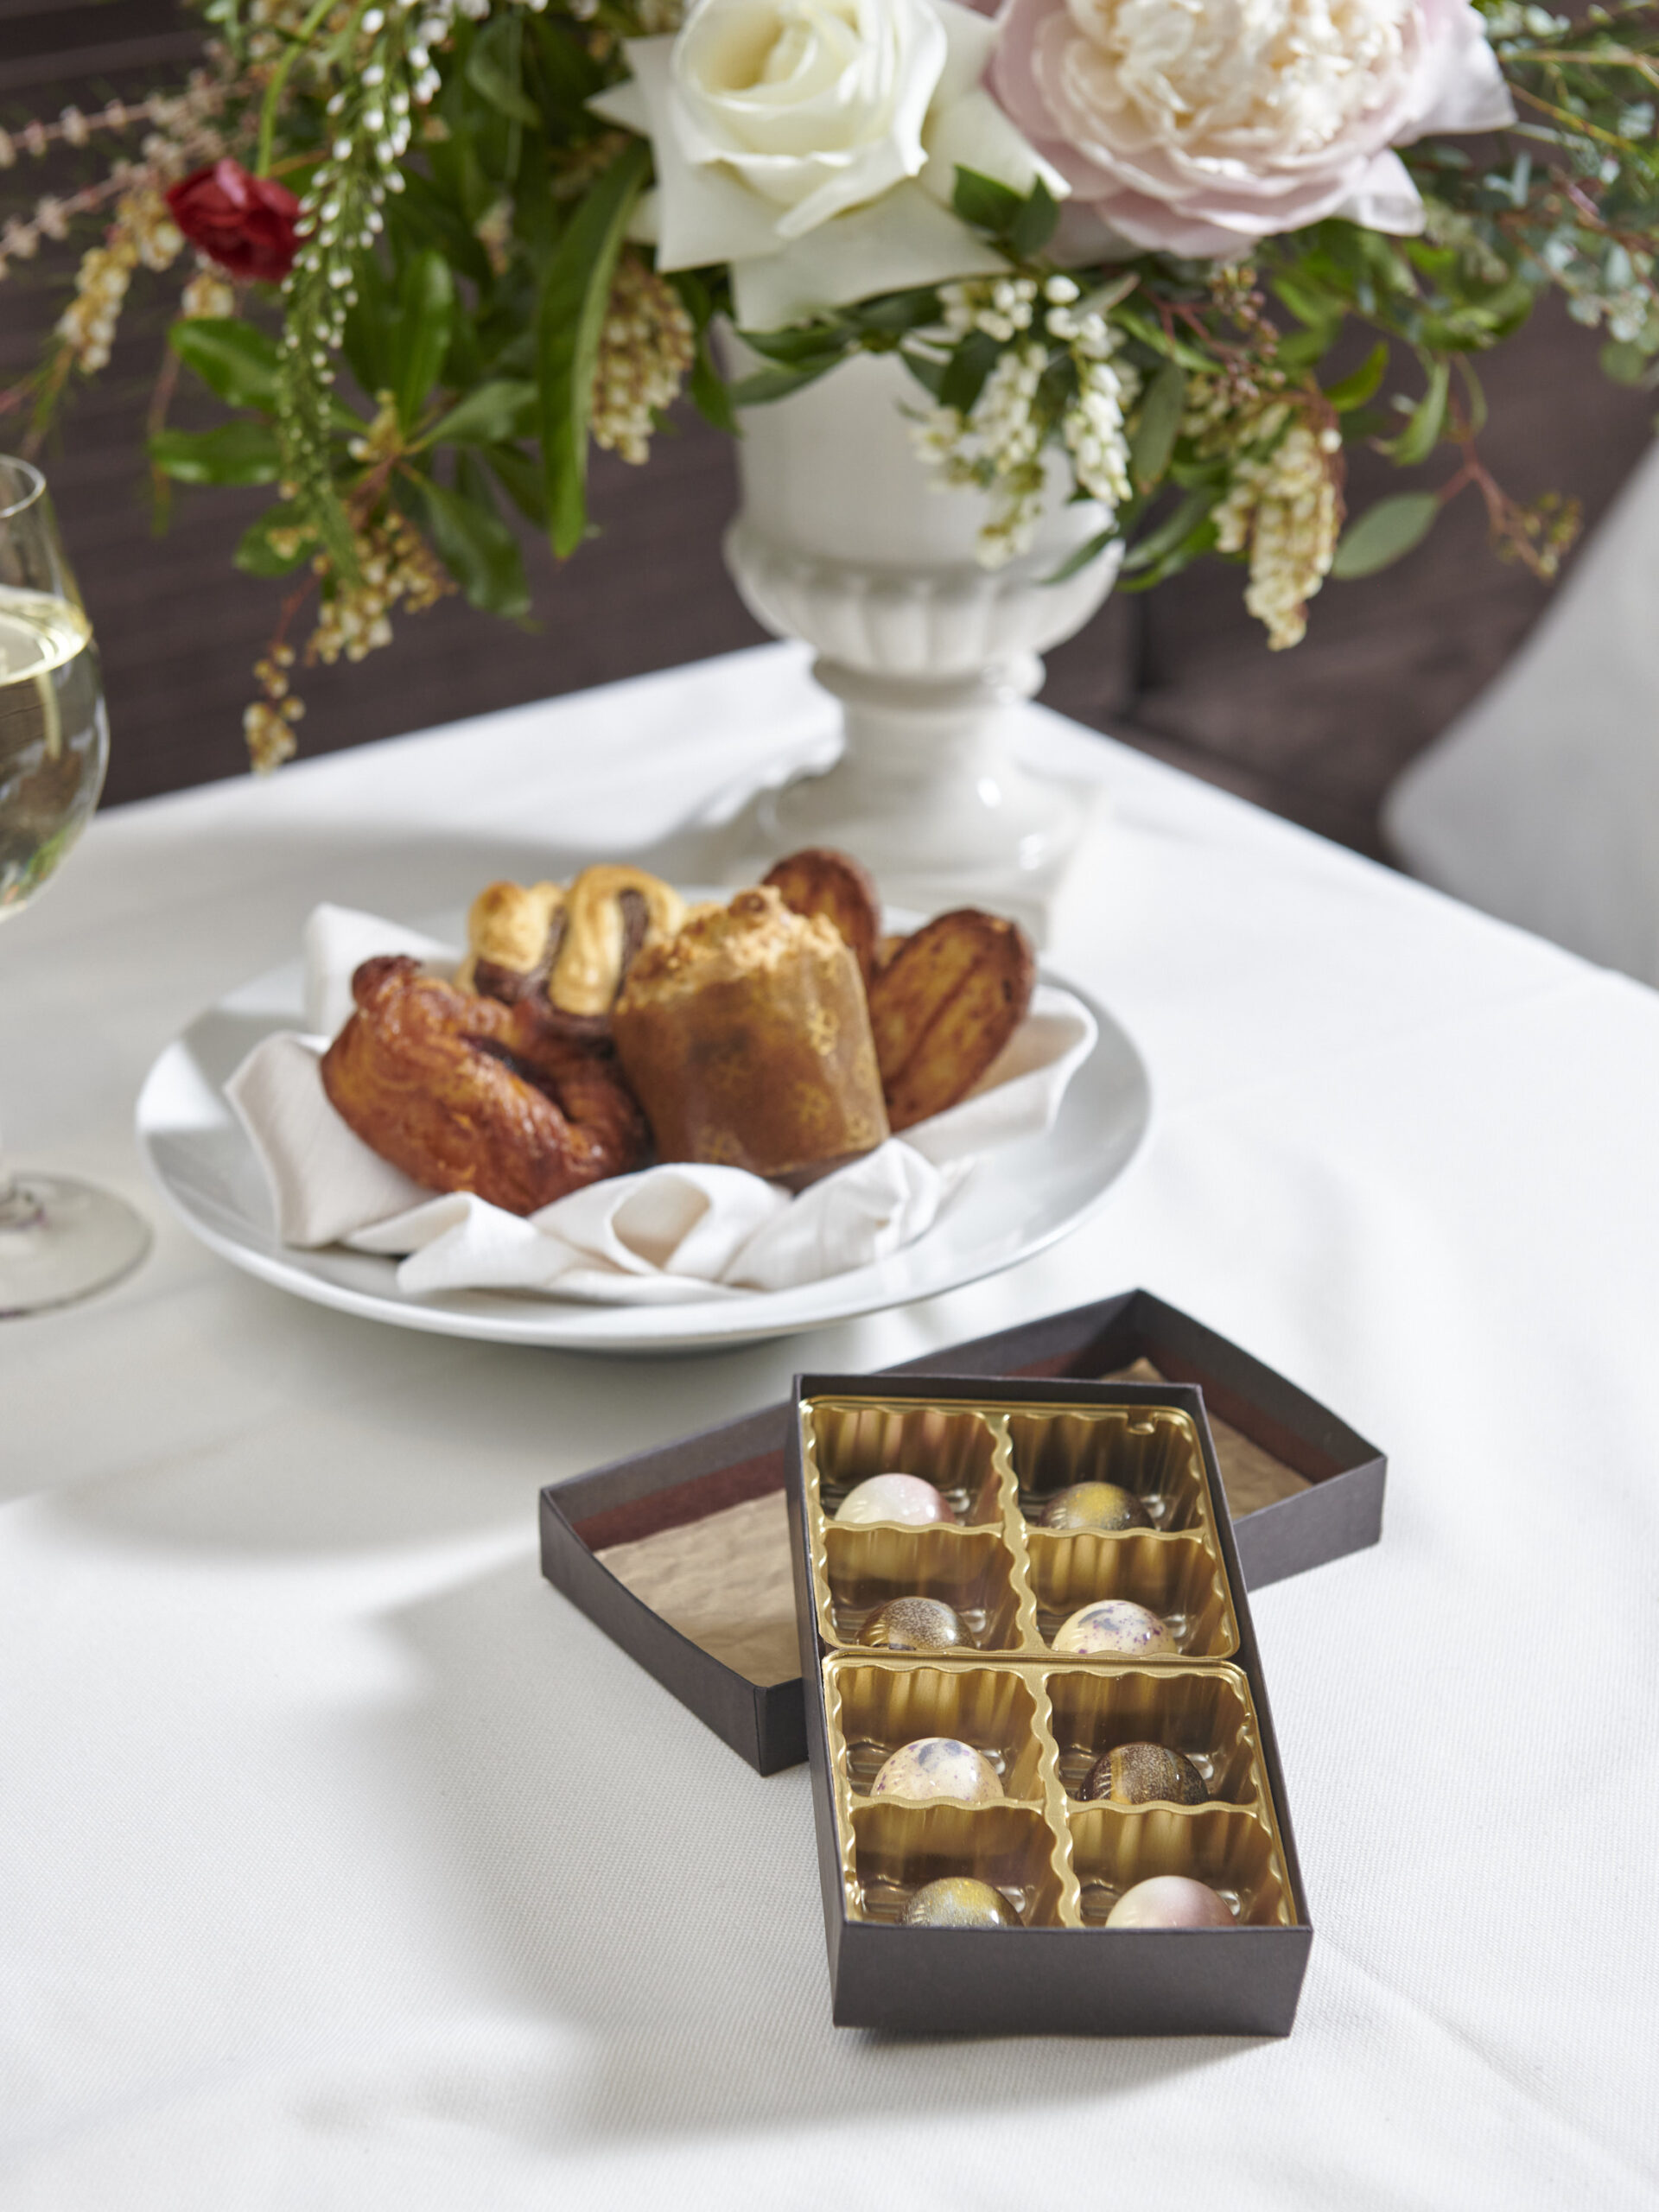 a basket of pastry and a box of bonbons on a table